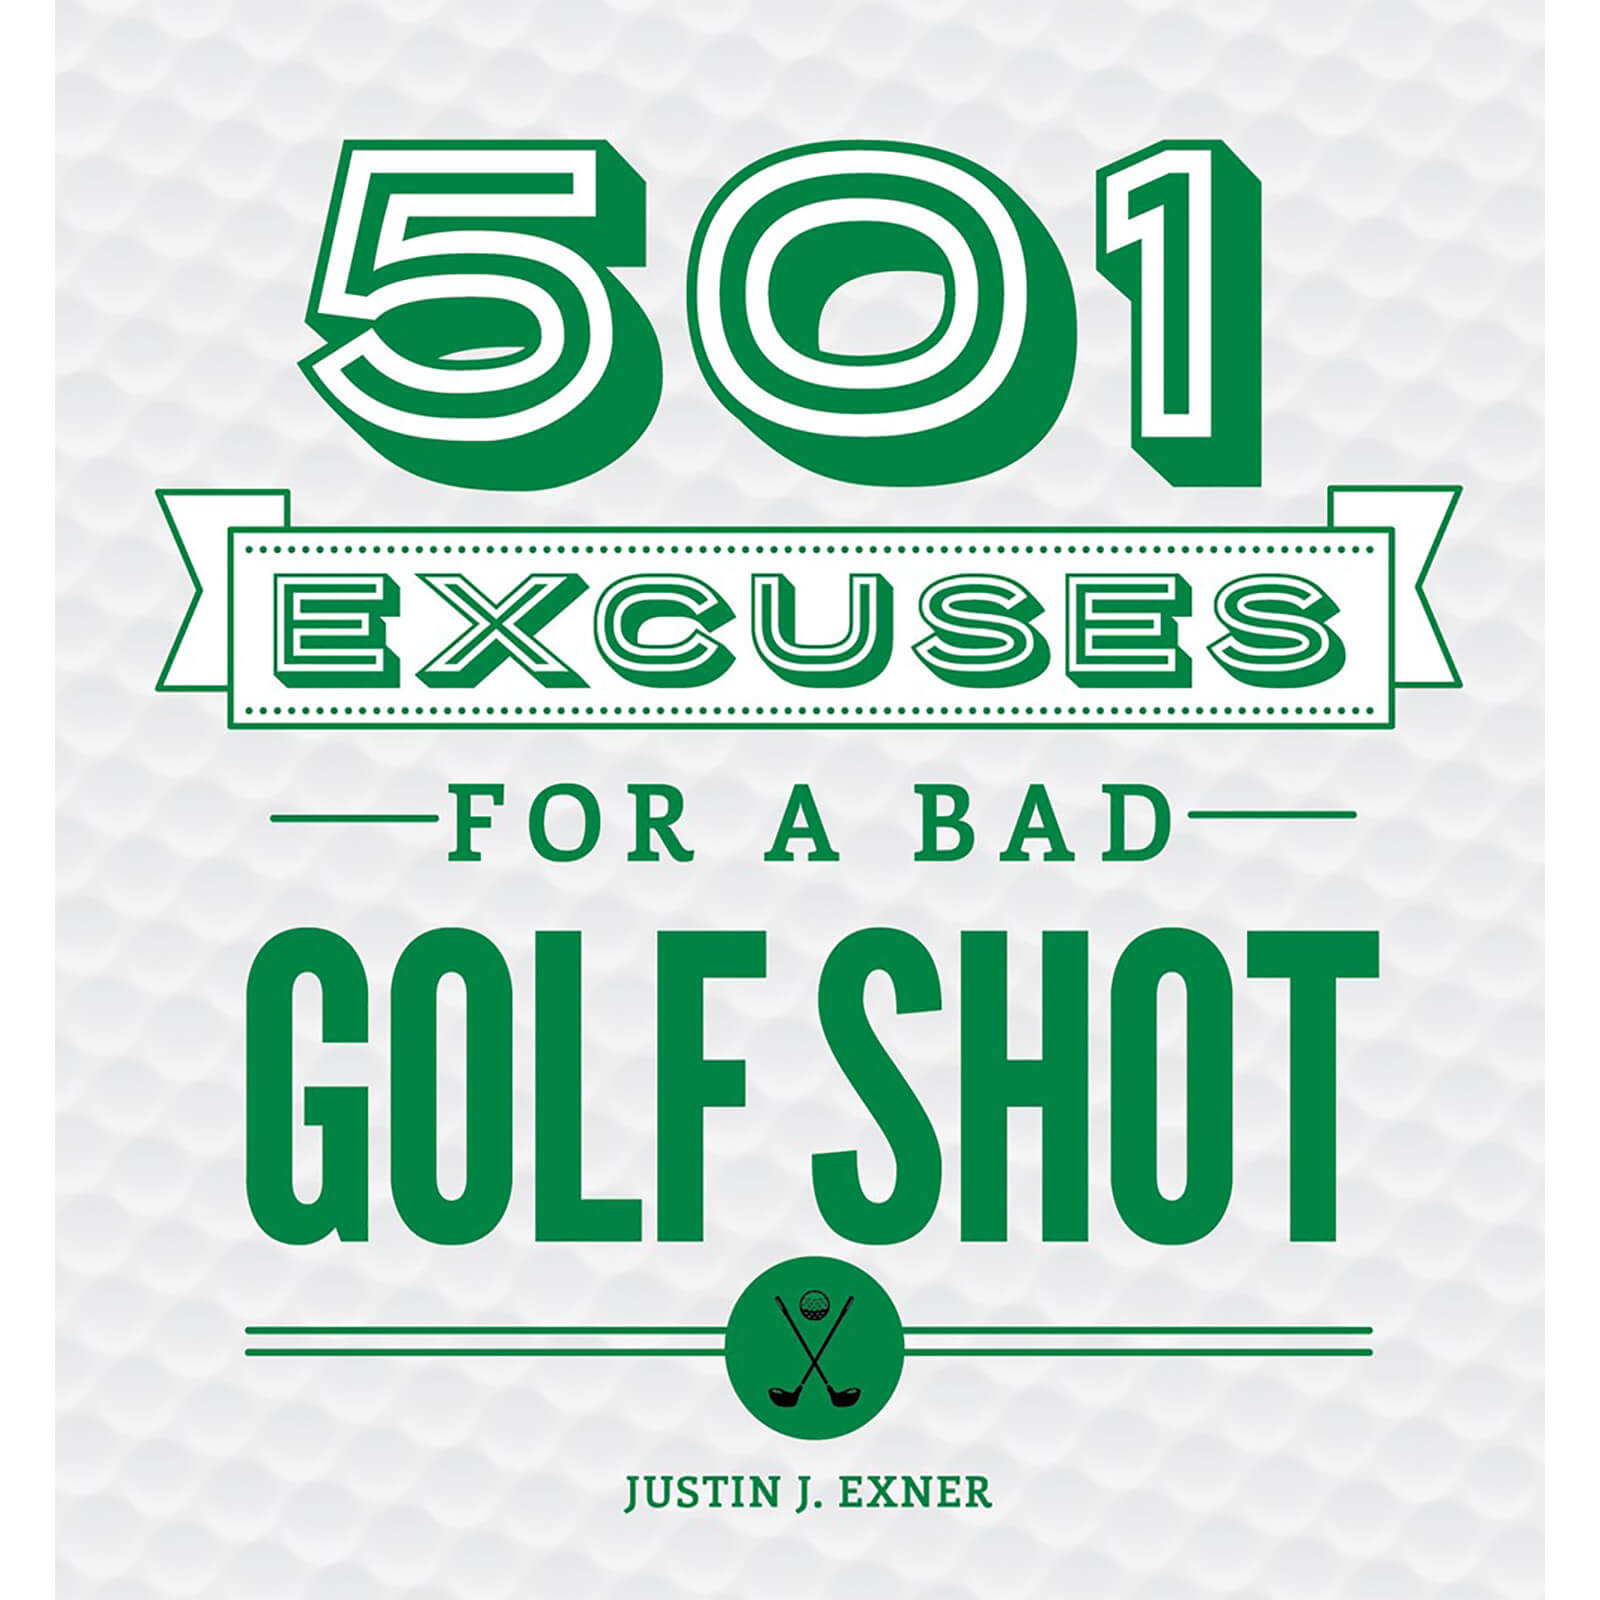 501 Excuses for a Bad Shot Hardback Book